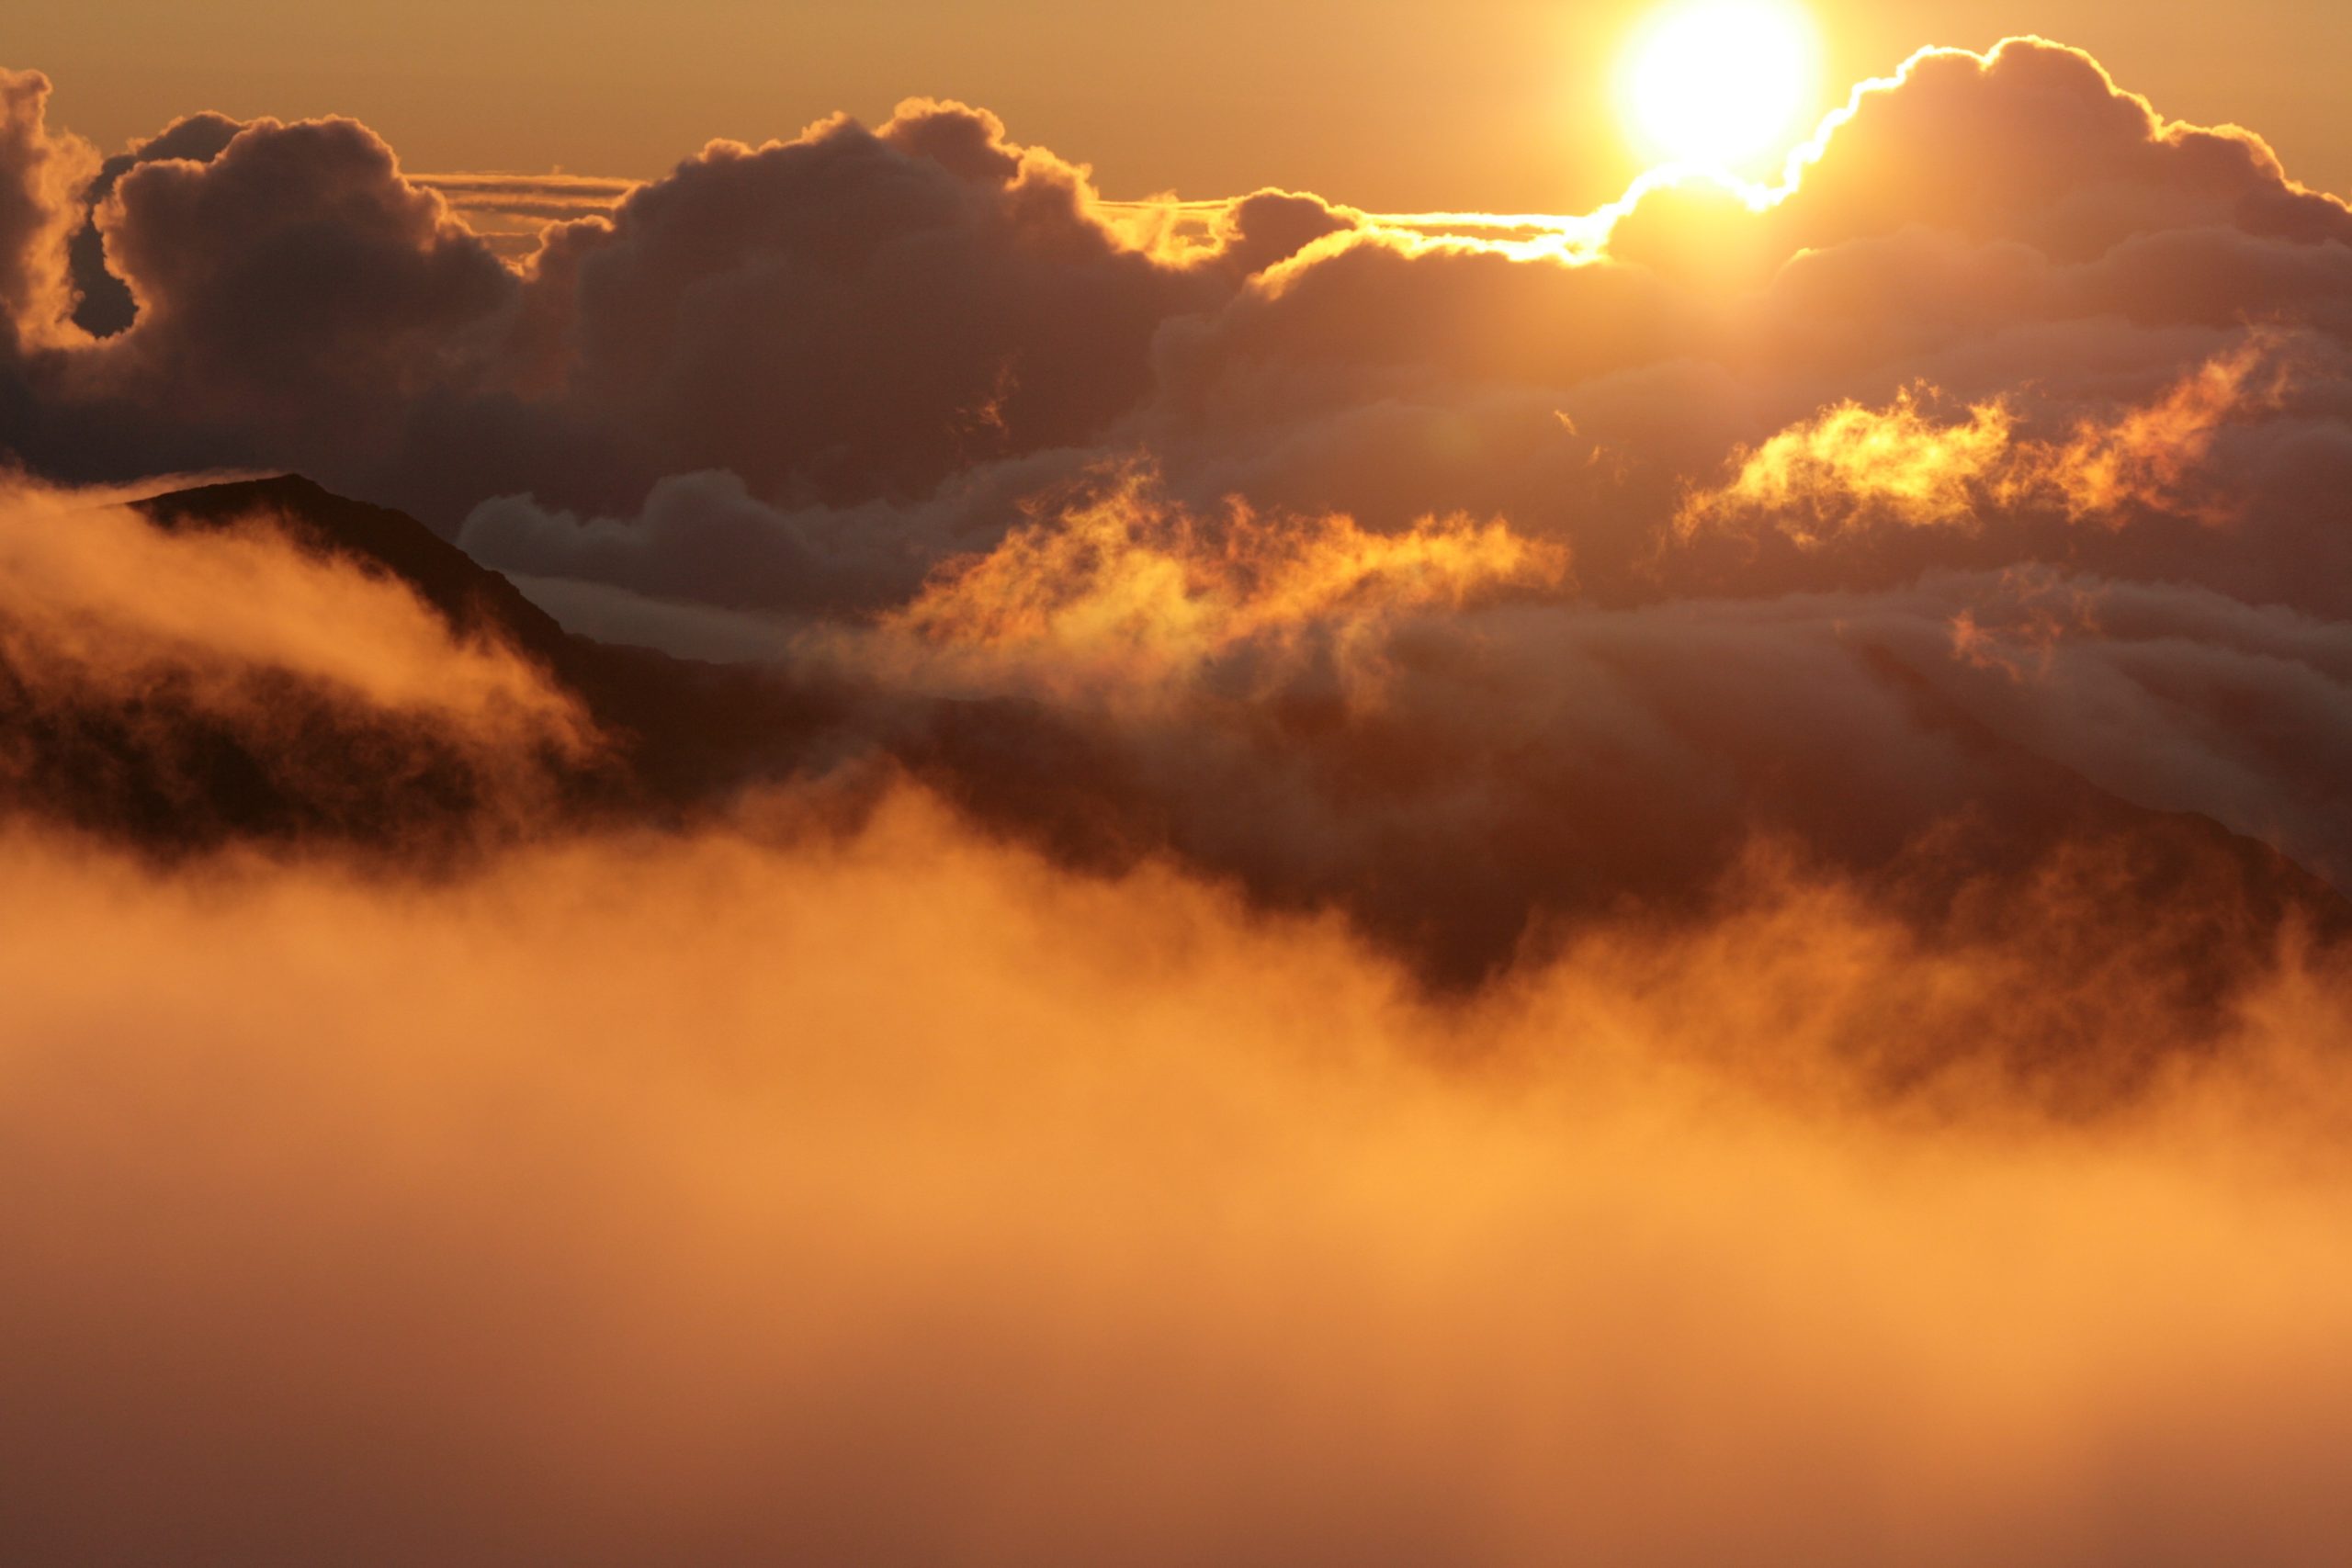 Sun setting above the clouds